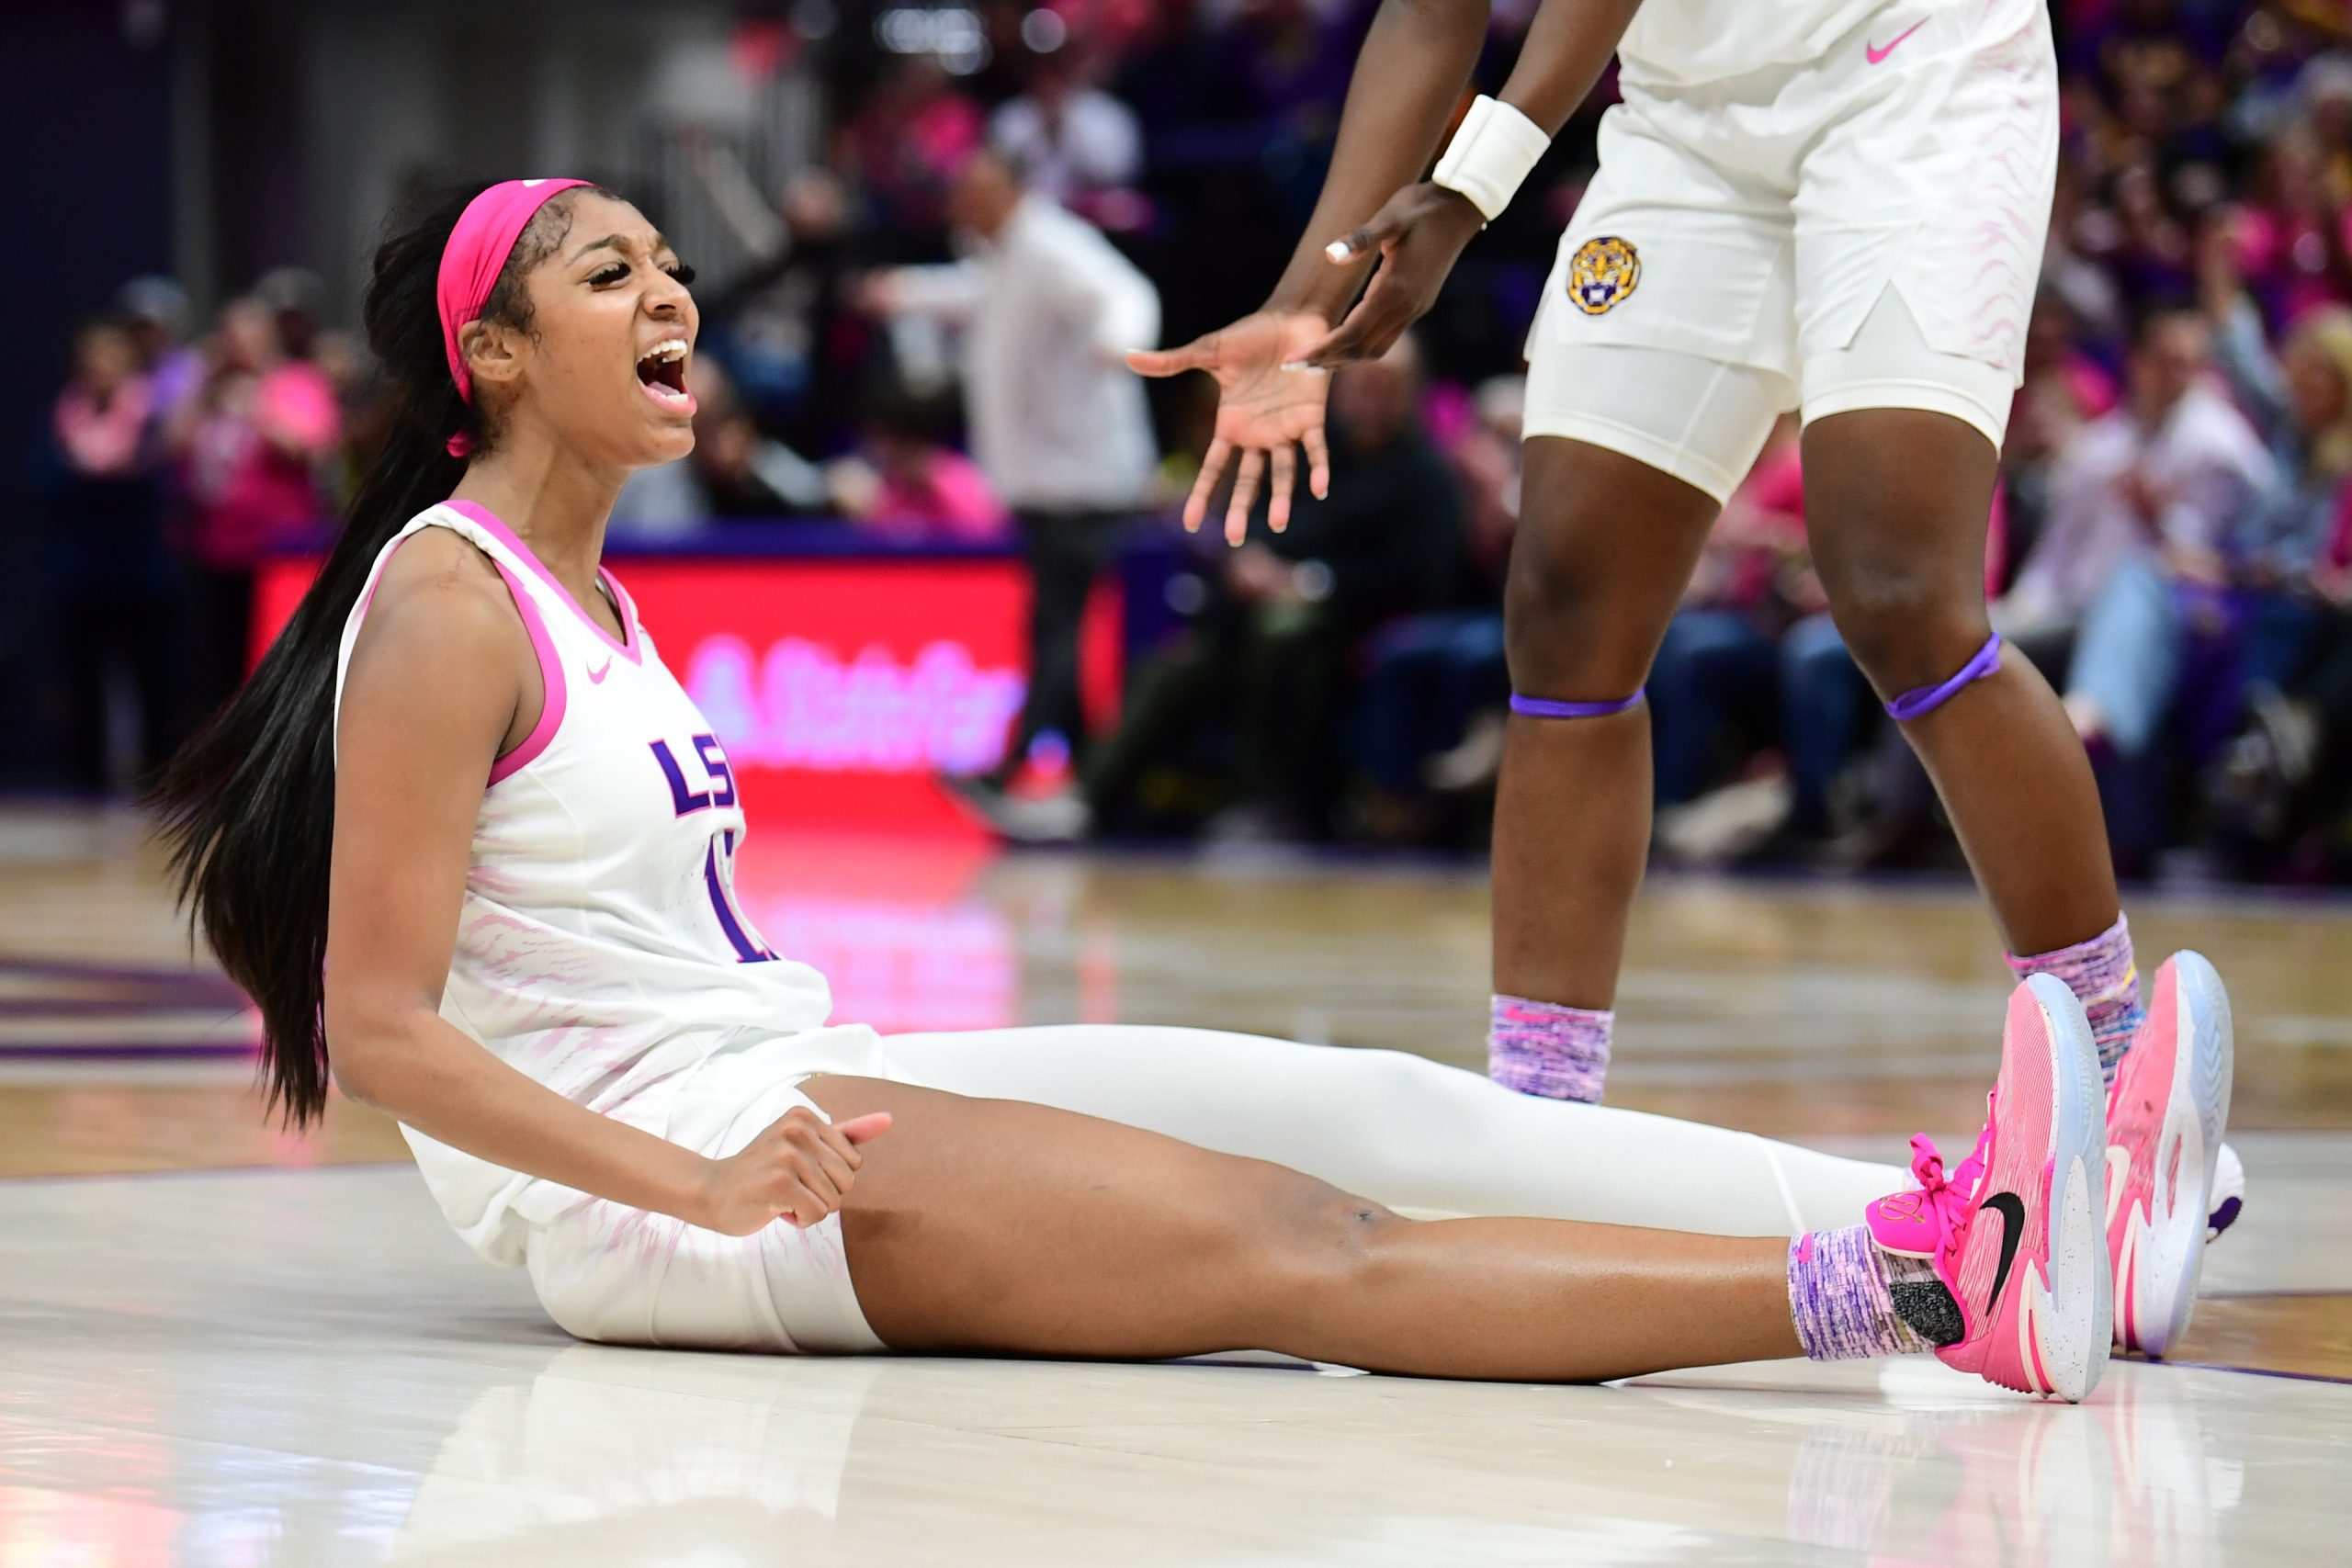 Oh Heavens: LSU's Angel Reese delivers career-high 36 points, 20